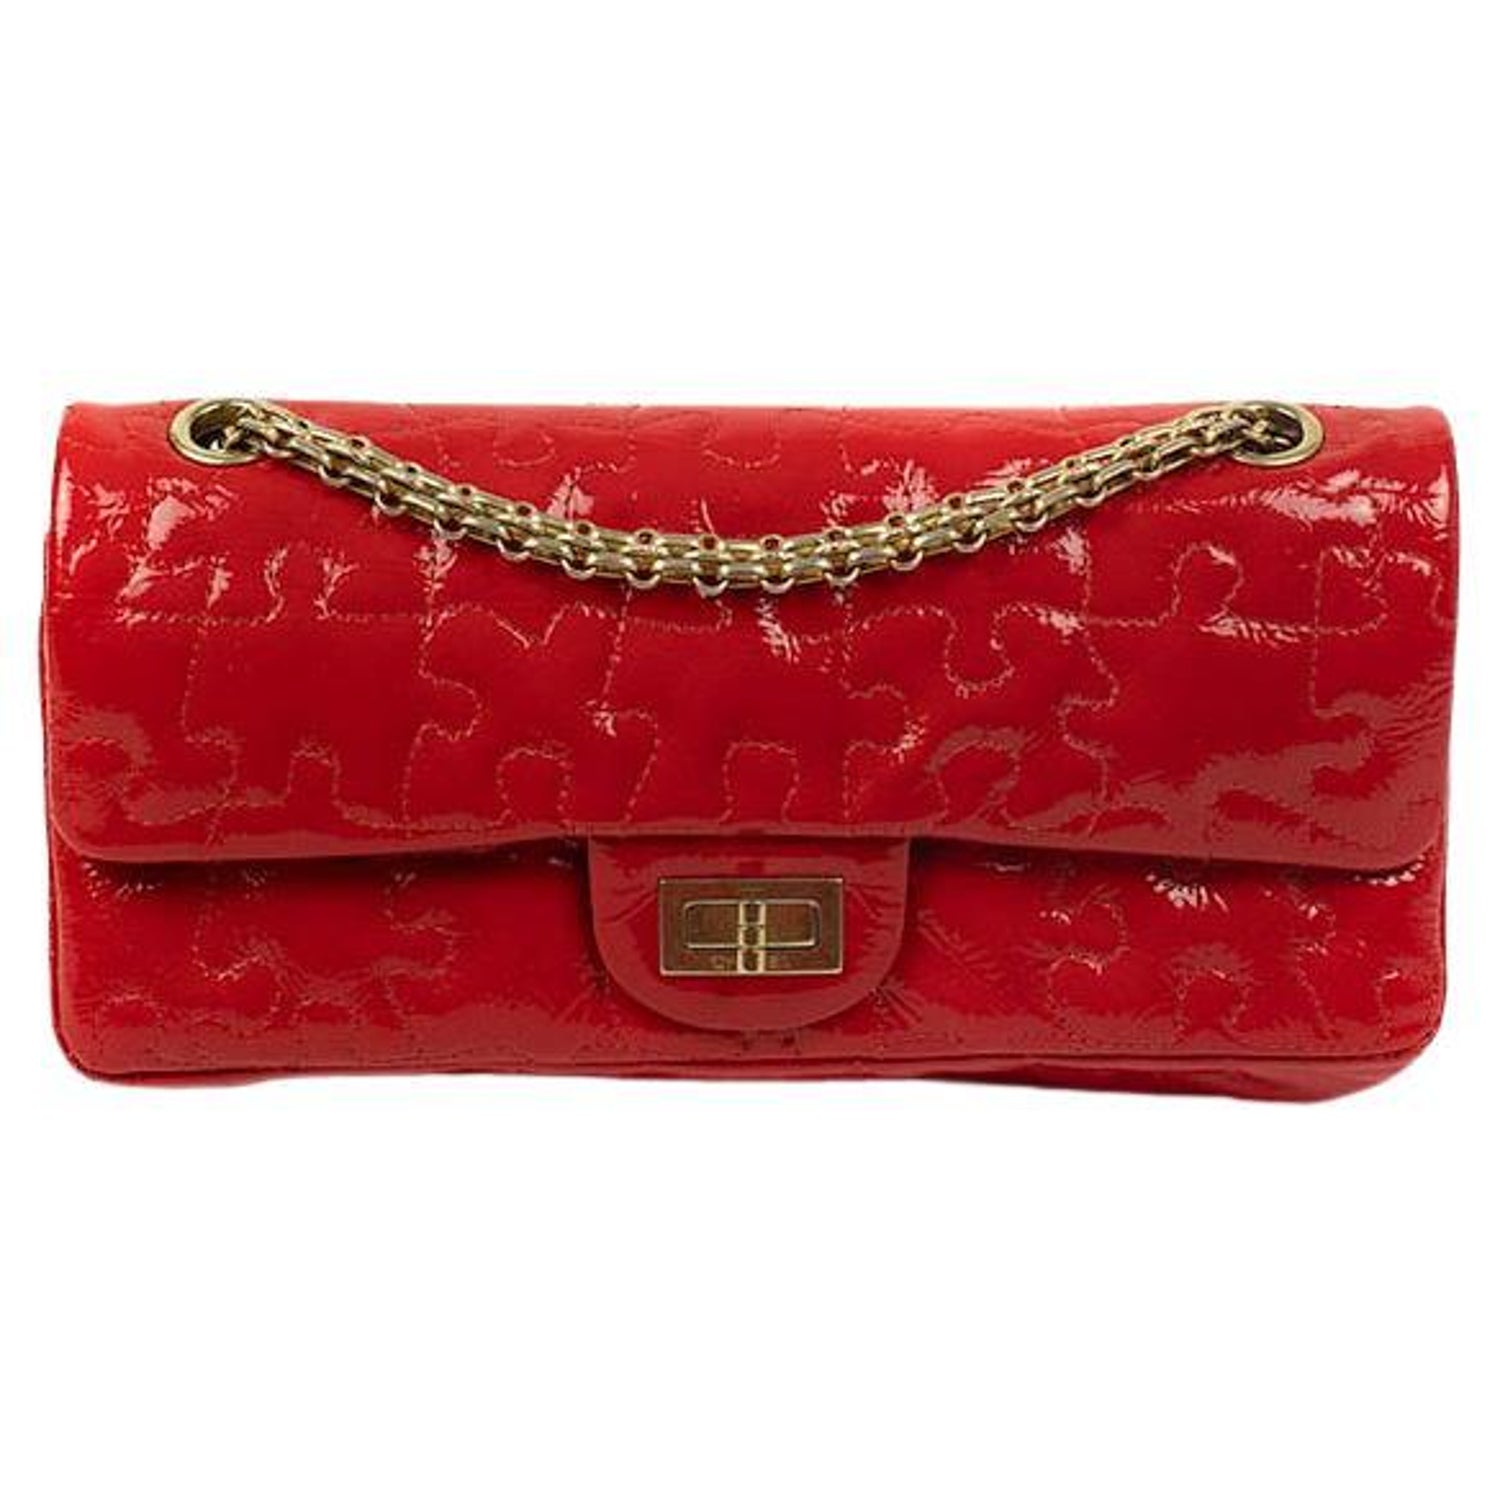 Chanel Red Patent Bag - 27 For Sale on 1stDibs  chanel patent leather bag  price, red patent leather bag, chanel patent mini